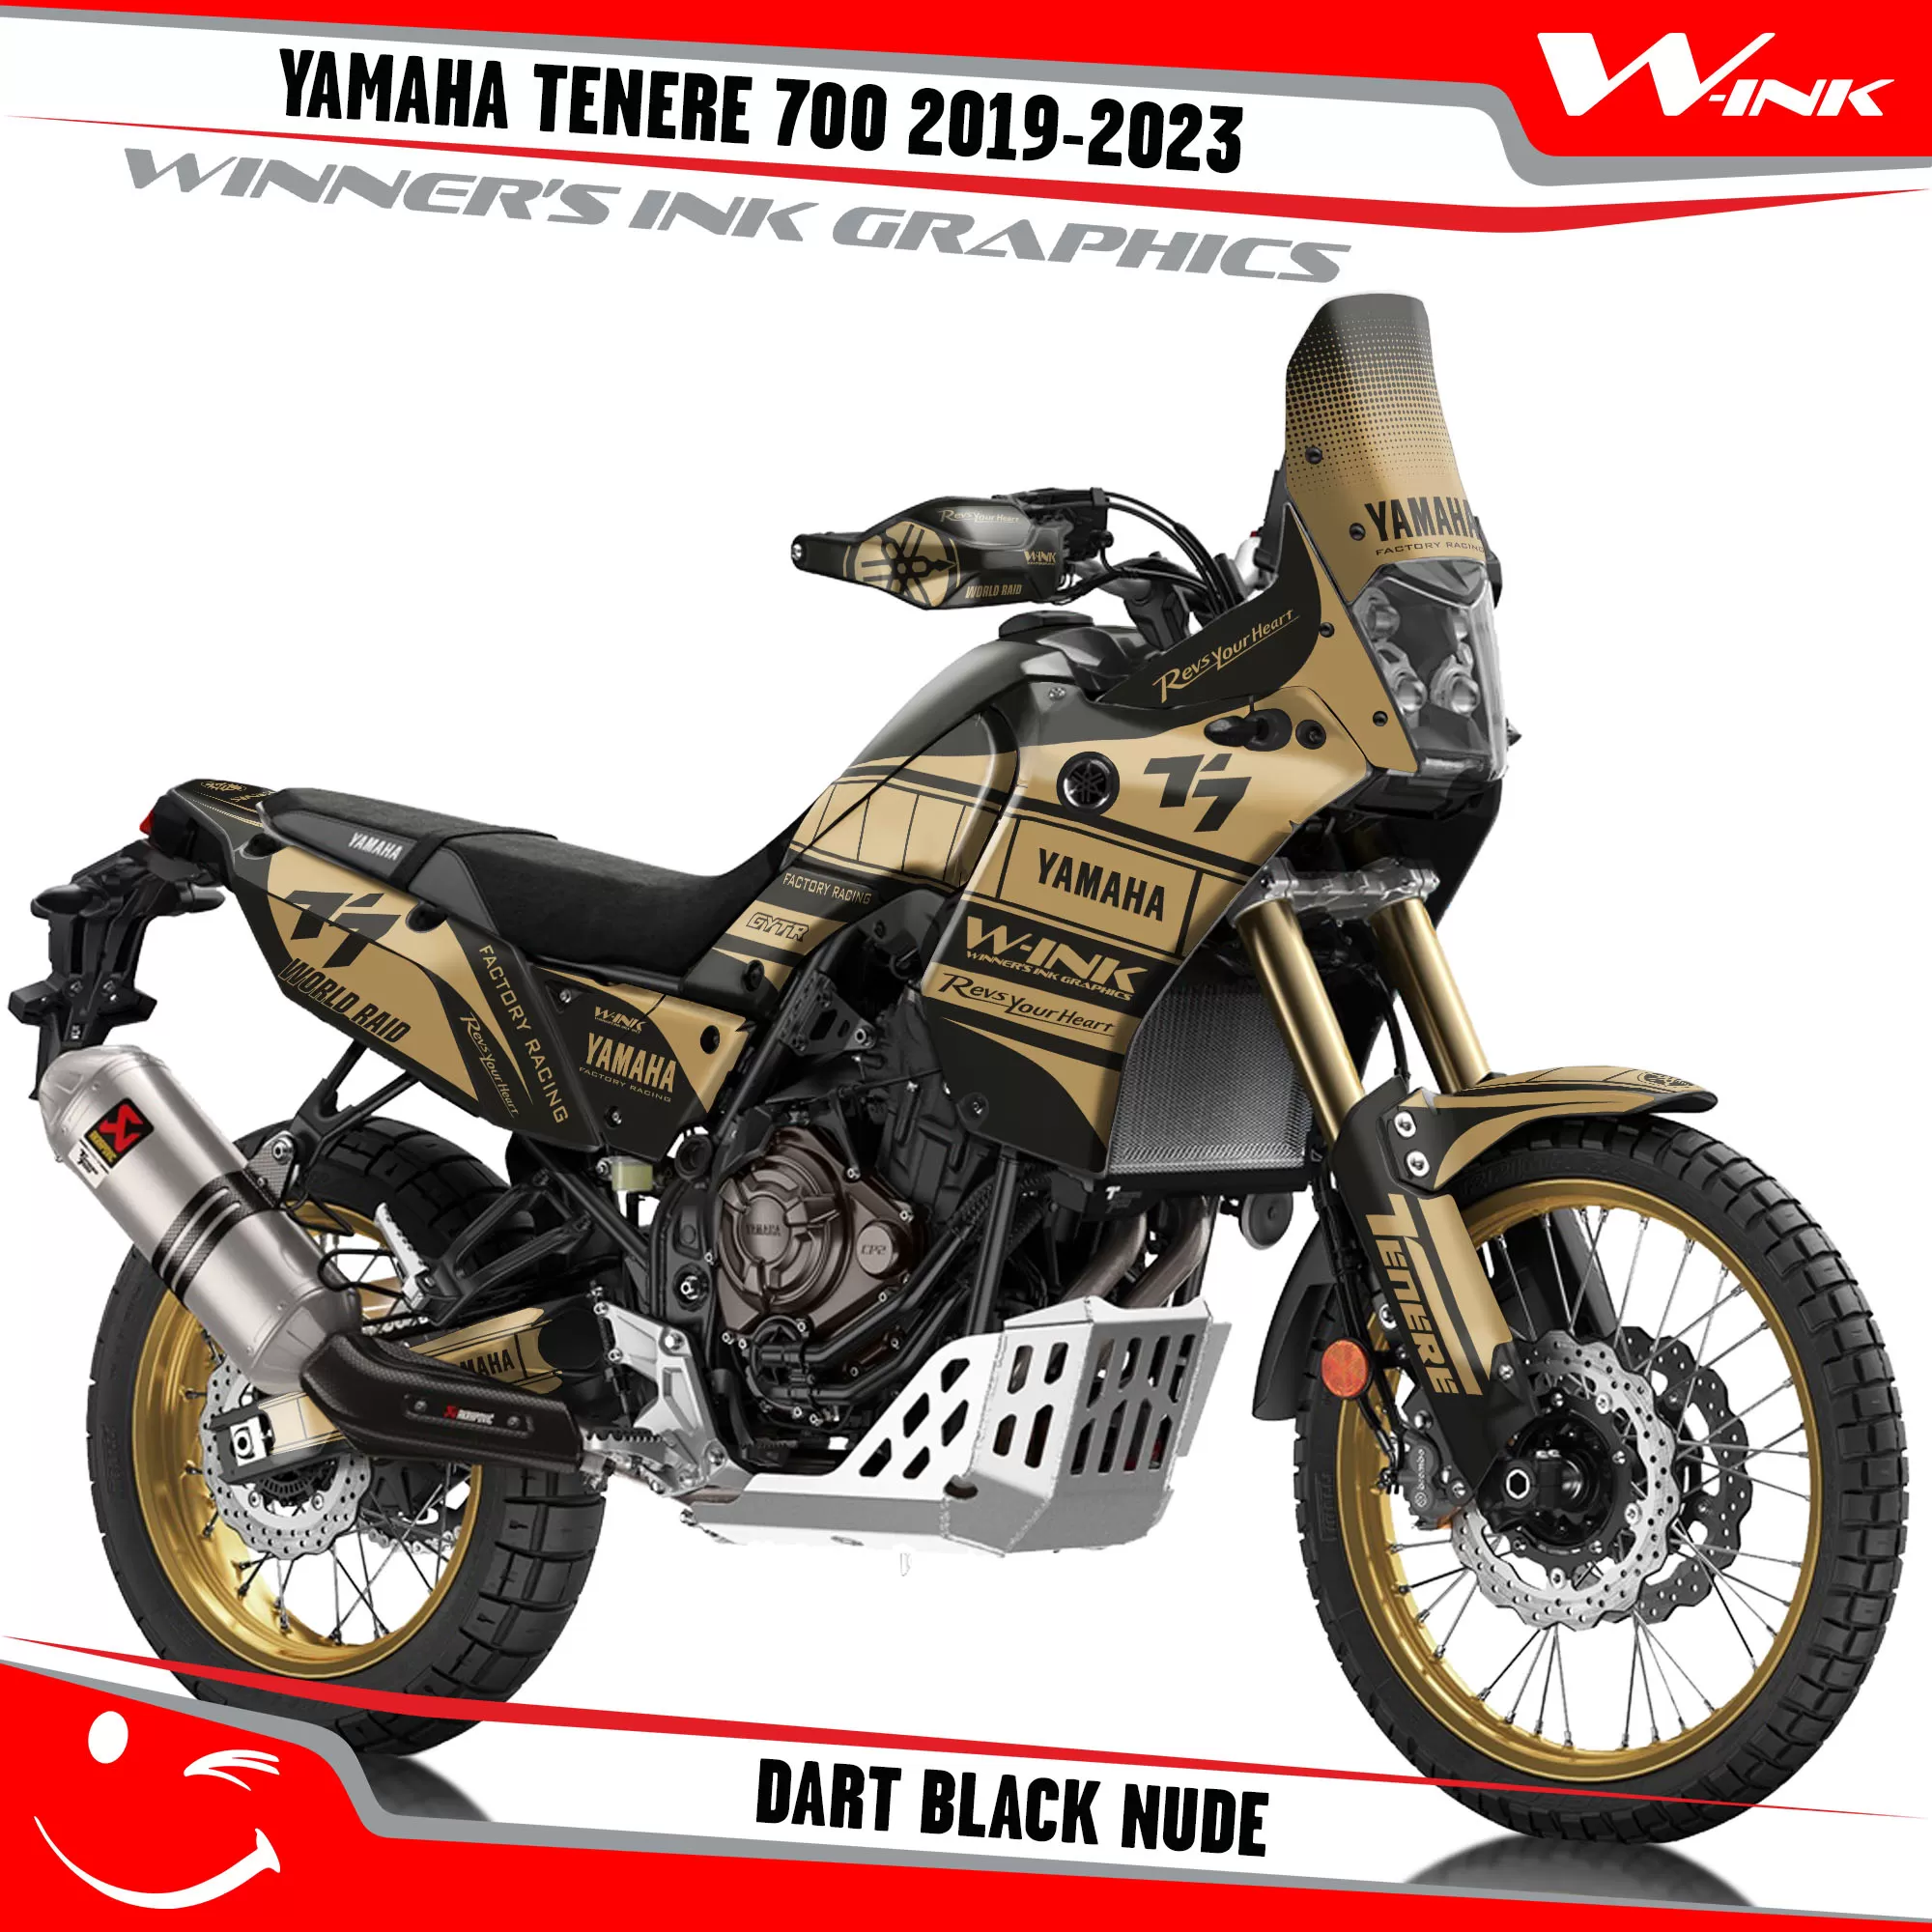 Yamaha-Tenere-700-2019-2020-2021-2022-2023-graphics-kit-and-decals-with-desing-Dart-Full-Black-Nude